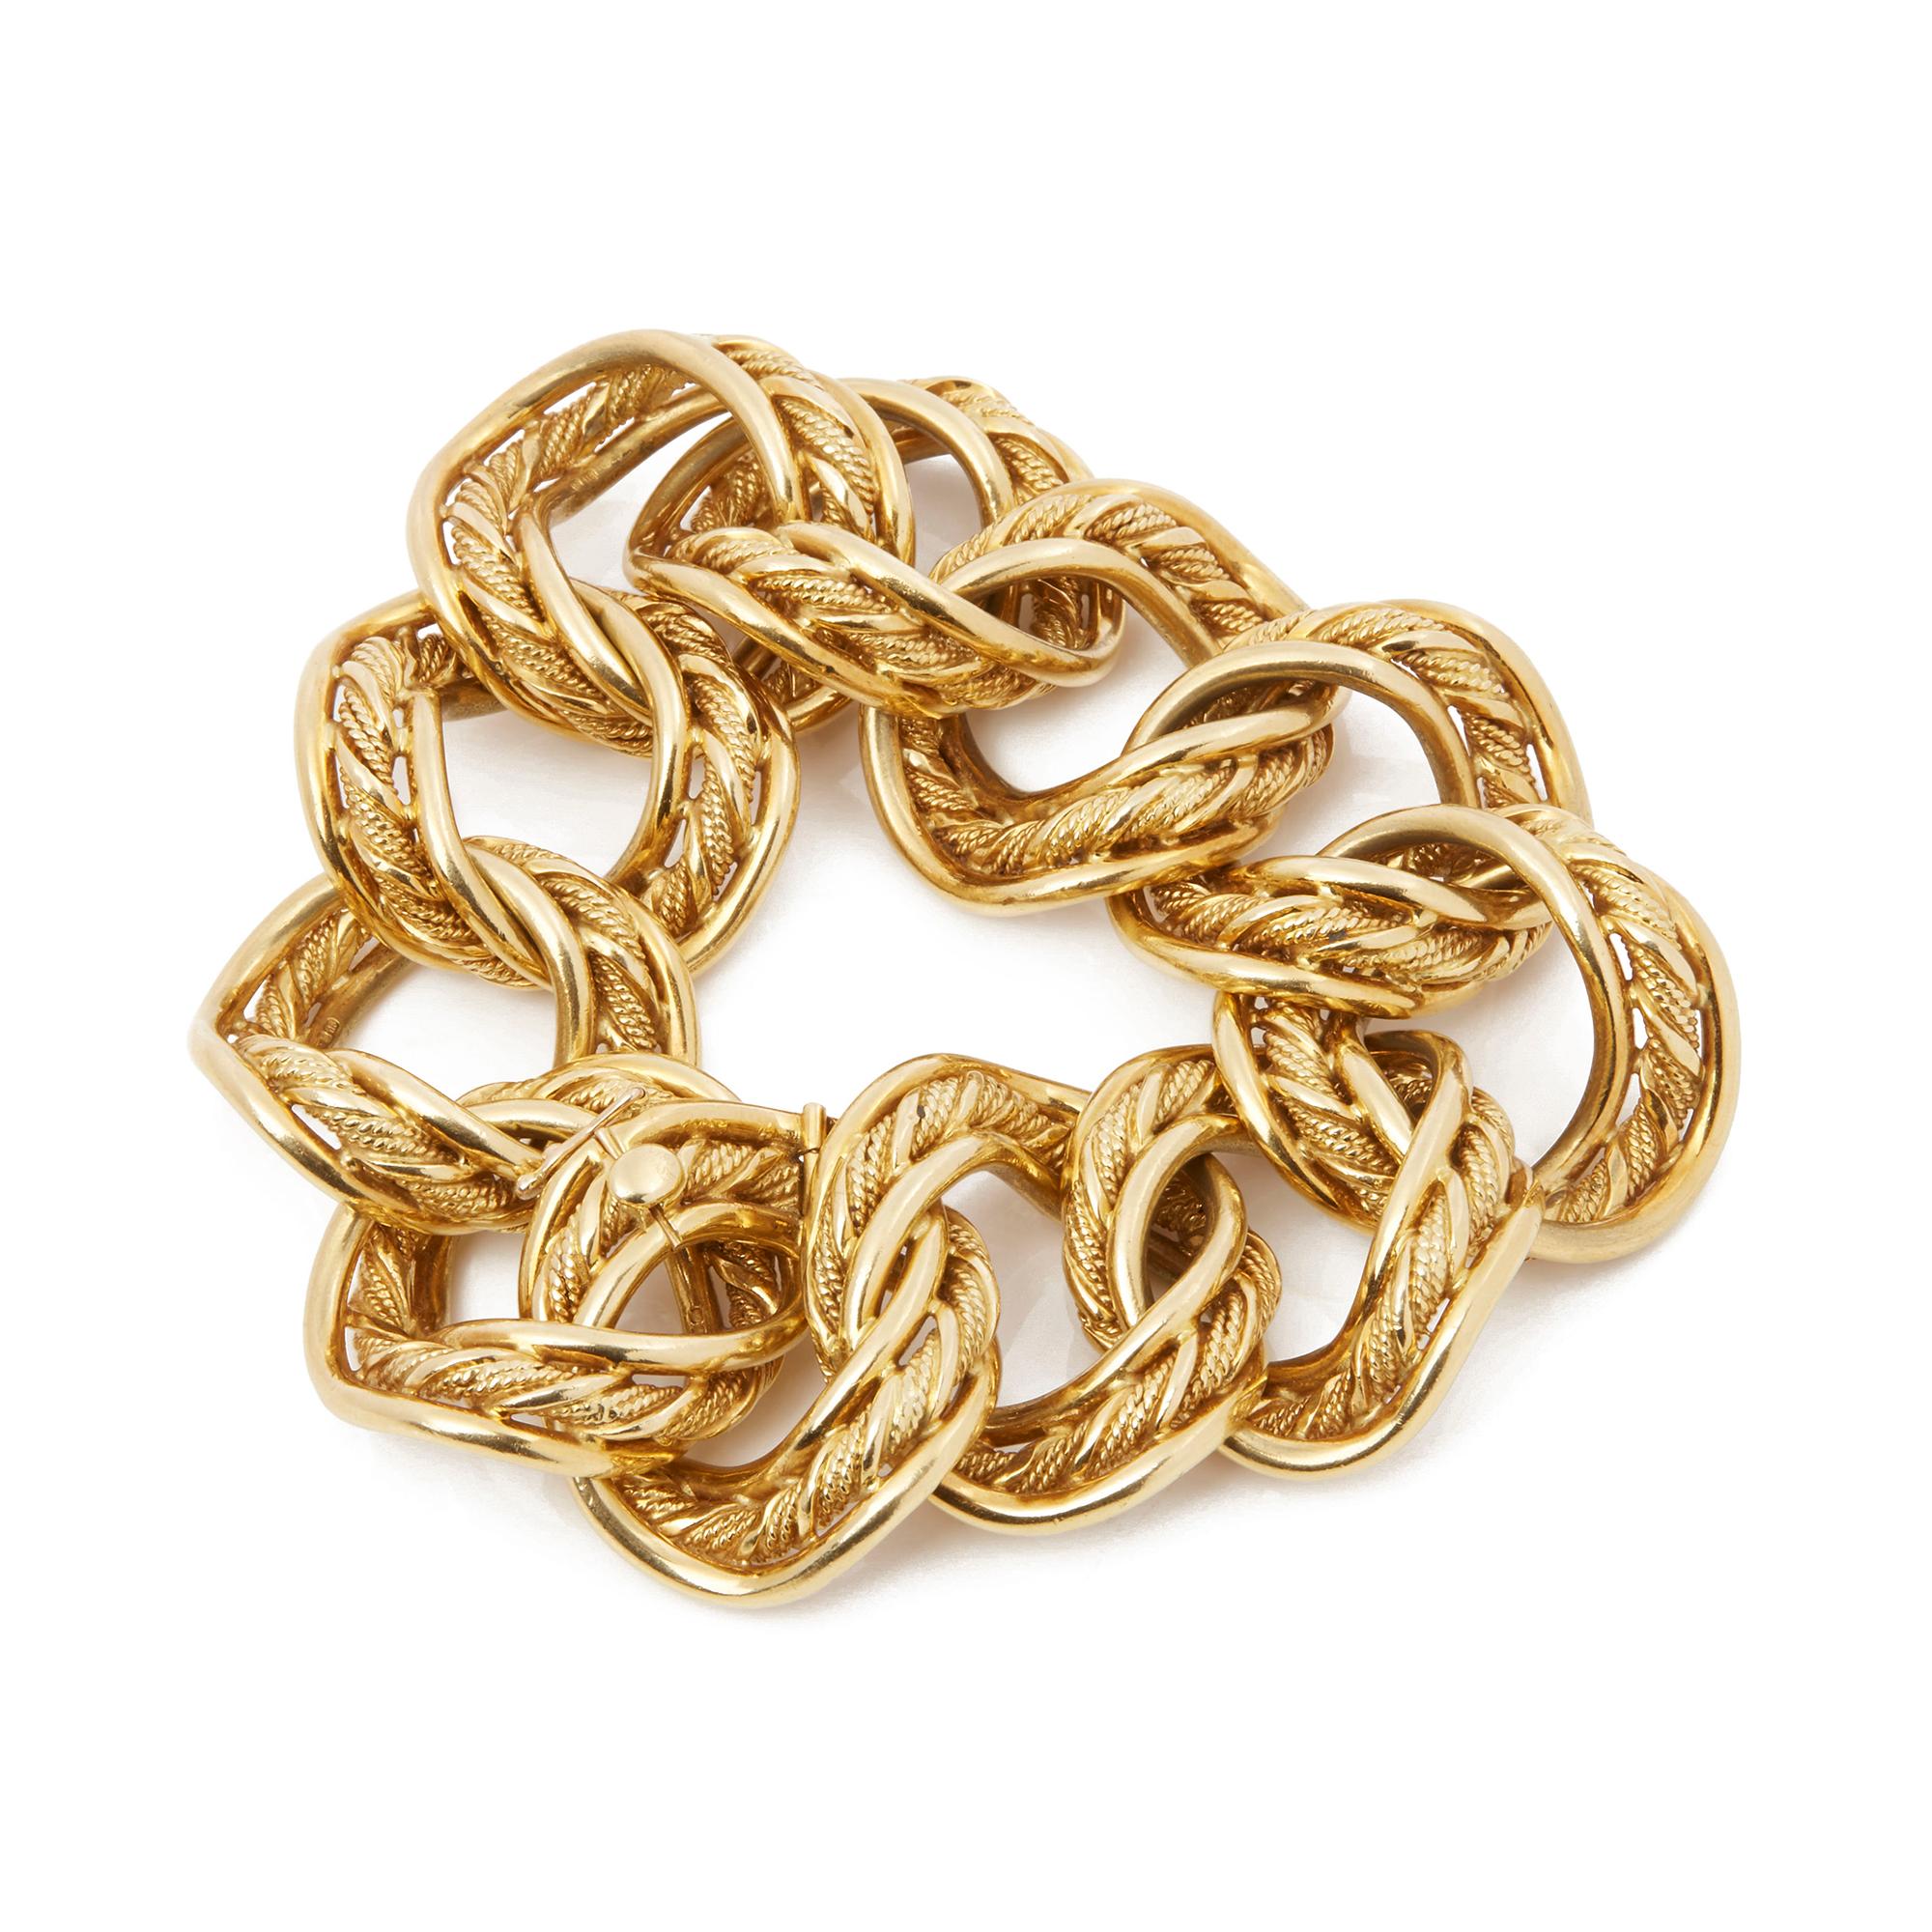 Code: COM2140
Brand: Kutchinsky
Description: 18k Yellow Gold 1960's Heavy Link Vintage Bracelet
Accompanied With: Box Only
Gender: Ladies
Bracelet Length: 19.5cm
Bracelet Width: 3cm
Clasp Type: Hinge
Condition: 8
Material: Yellow Gold
Total Weight: